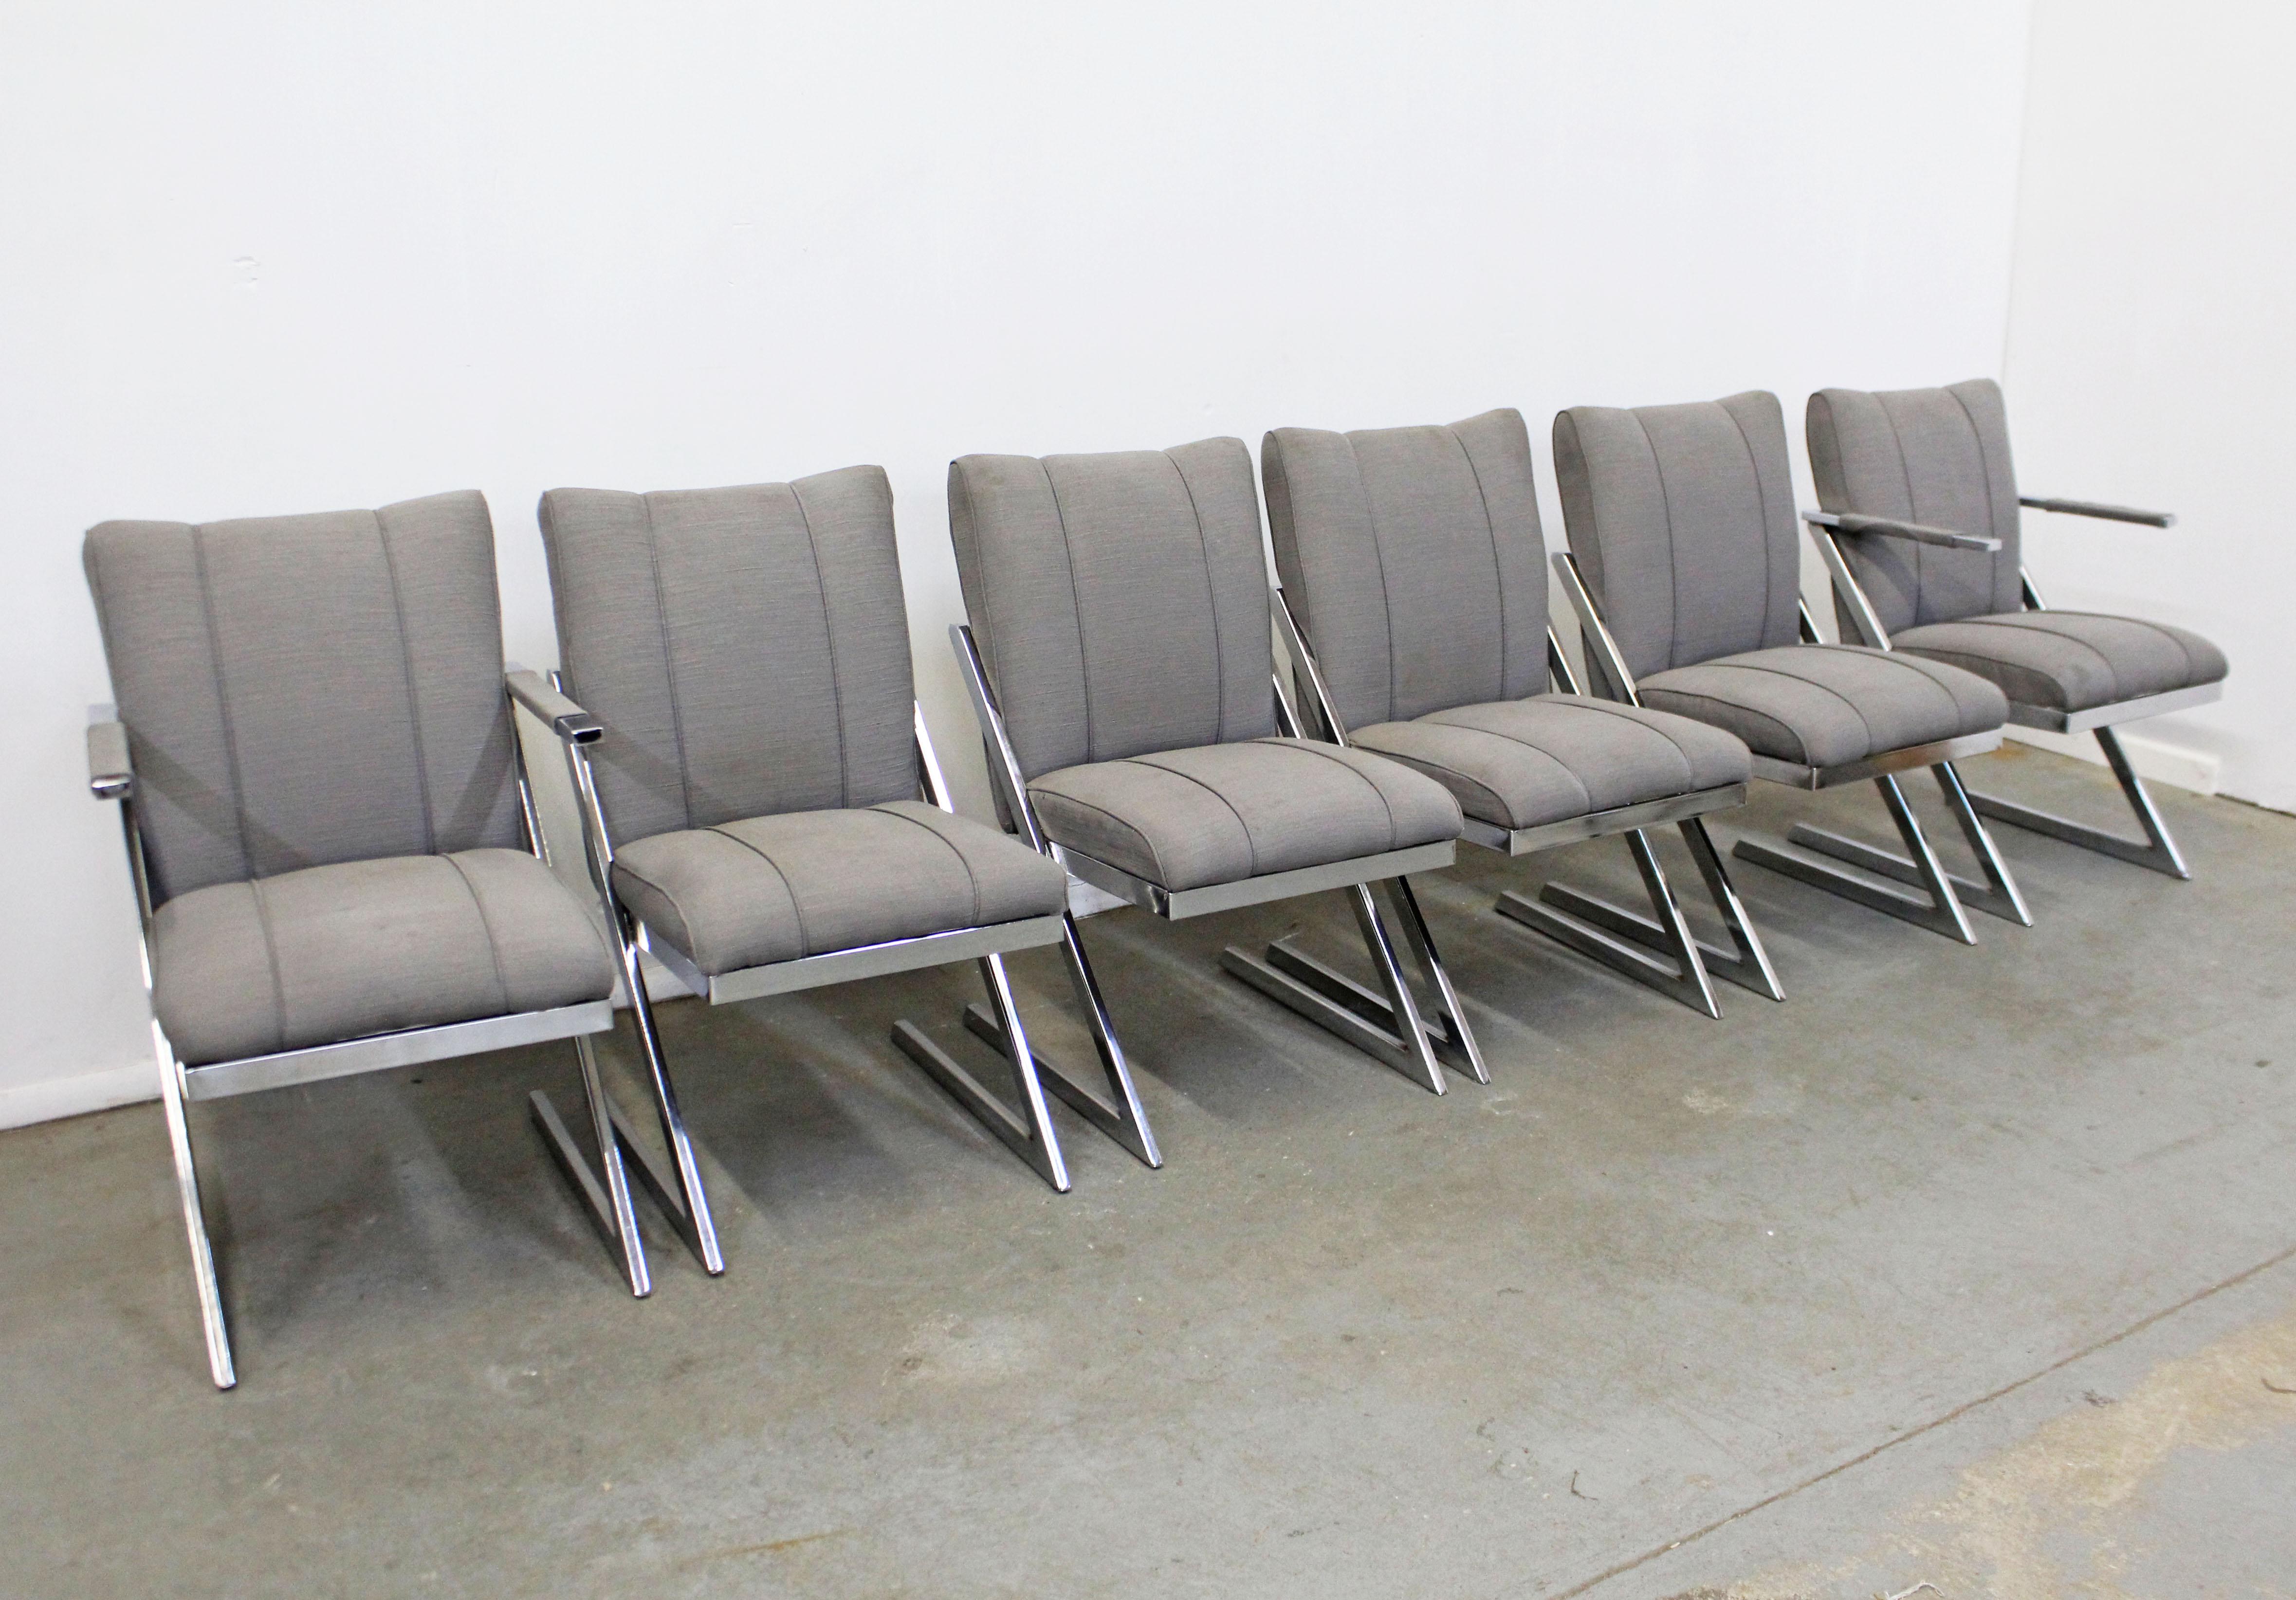 Offered is a set of 6 vintage chrome dining chairs in the style of Milo Baughman. The chairs have a Z-bar cantilevered base made of chrome with gray upholstery. They are in structurally sound condition, need to be reupholstered. Shows some surface